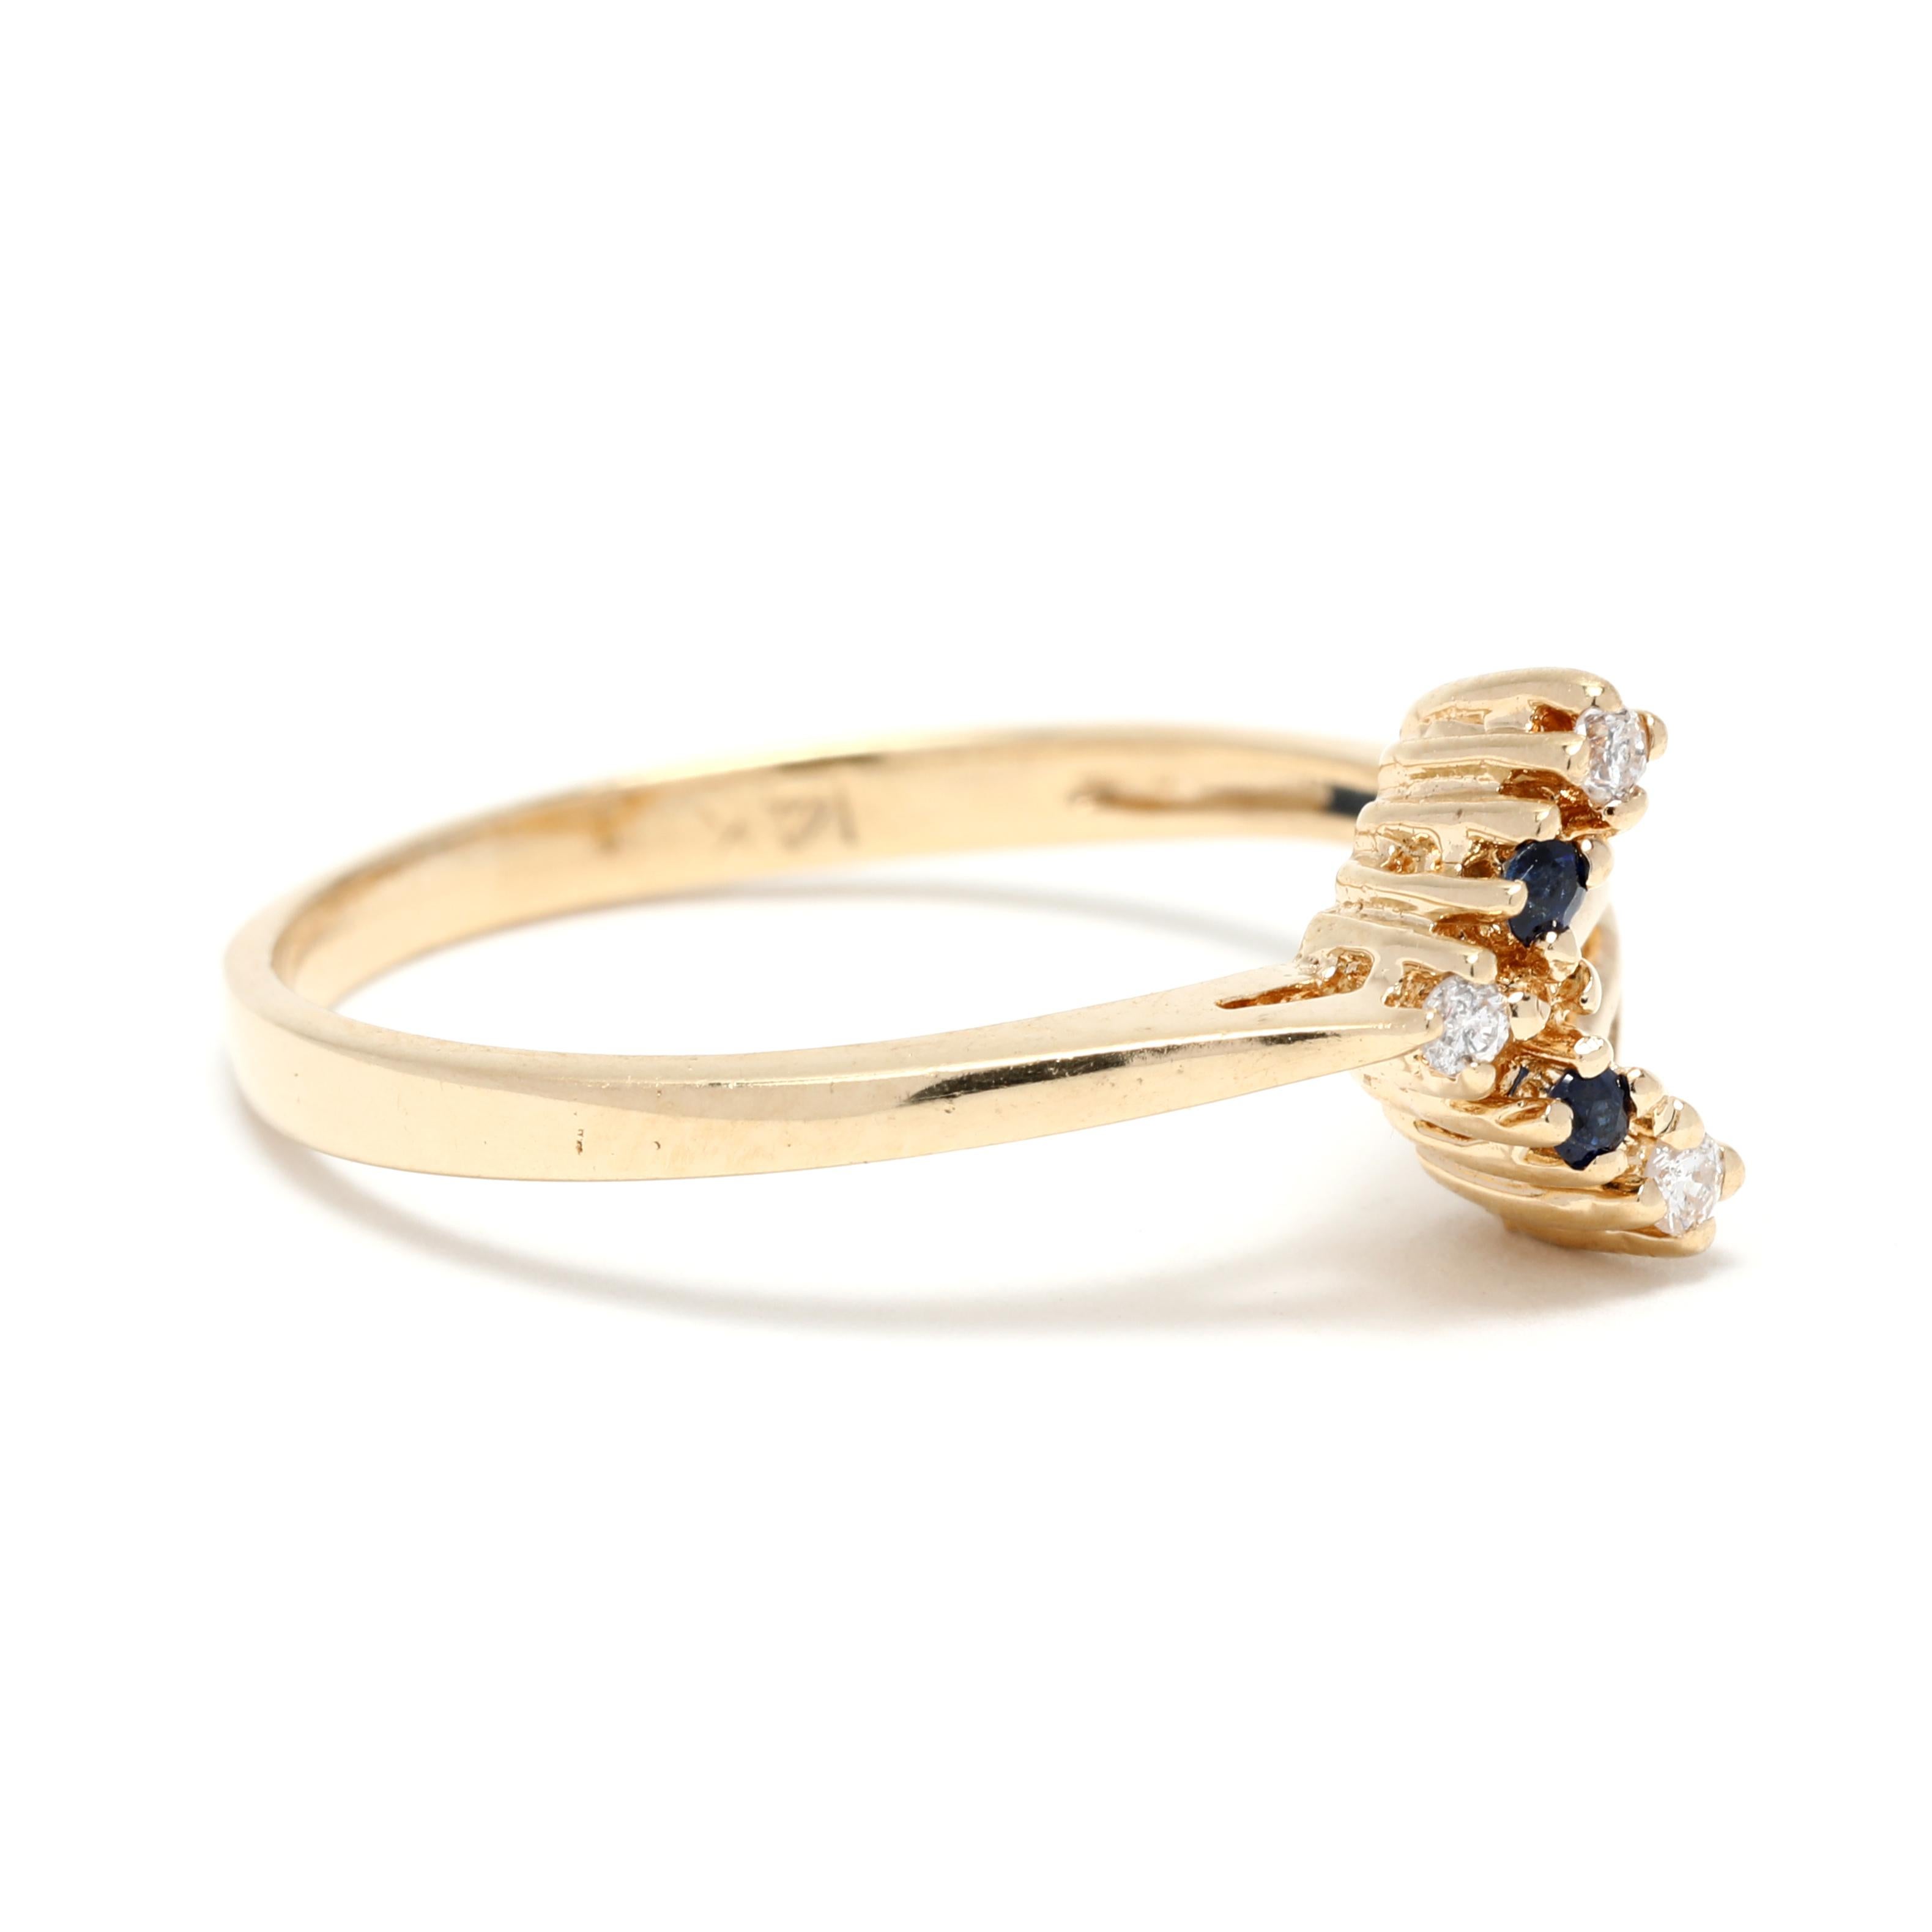 This 0.07ctw Natural Sapphire Diamond Arrow Ring is the perfect accessory for the modern minimalist. Crafted in 14K Yellow Gold, this beautiful and simple V-shaped ring features a diamond studded arrow at its center, encircled by a halo of sparkling